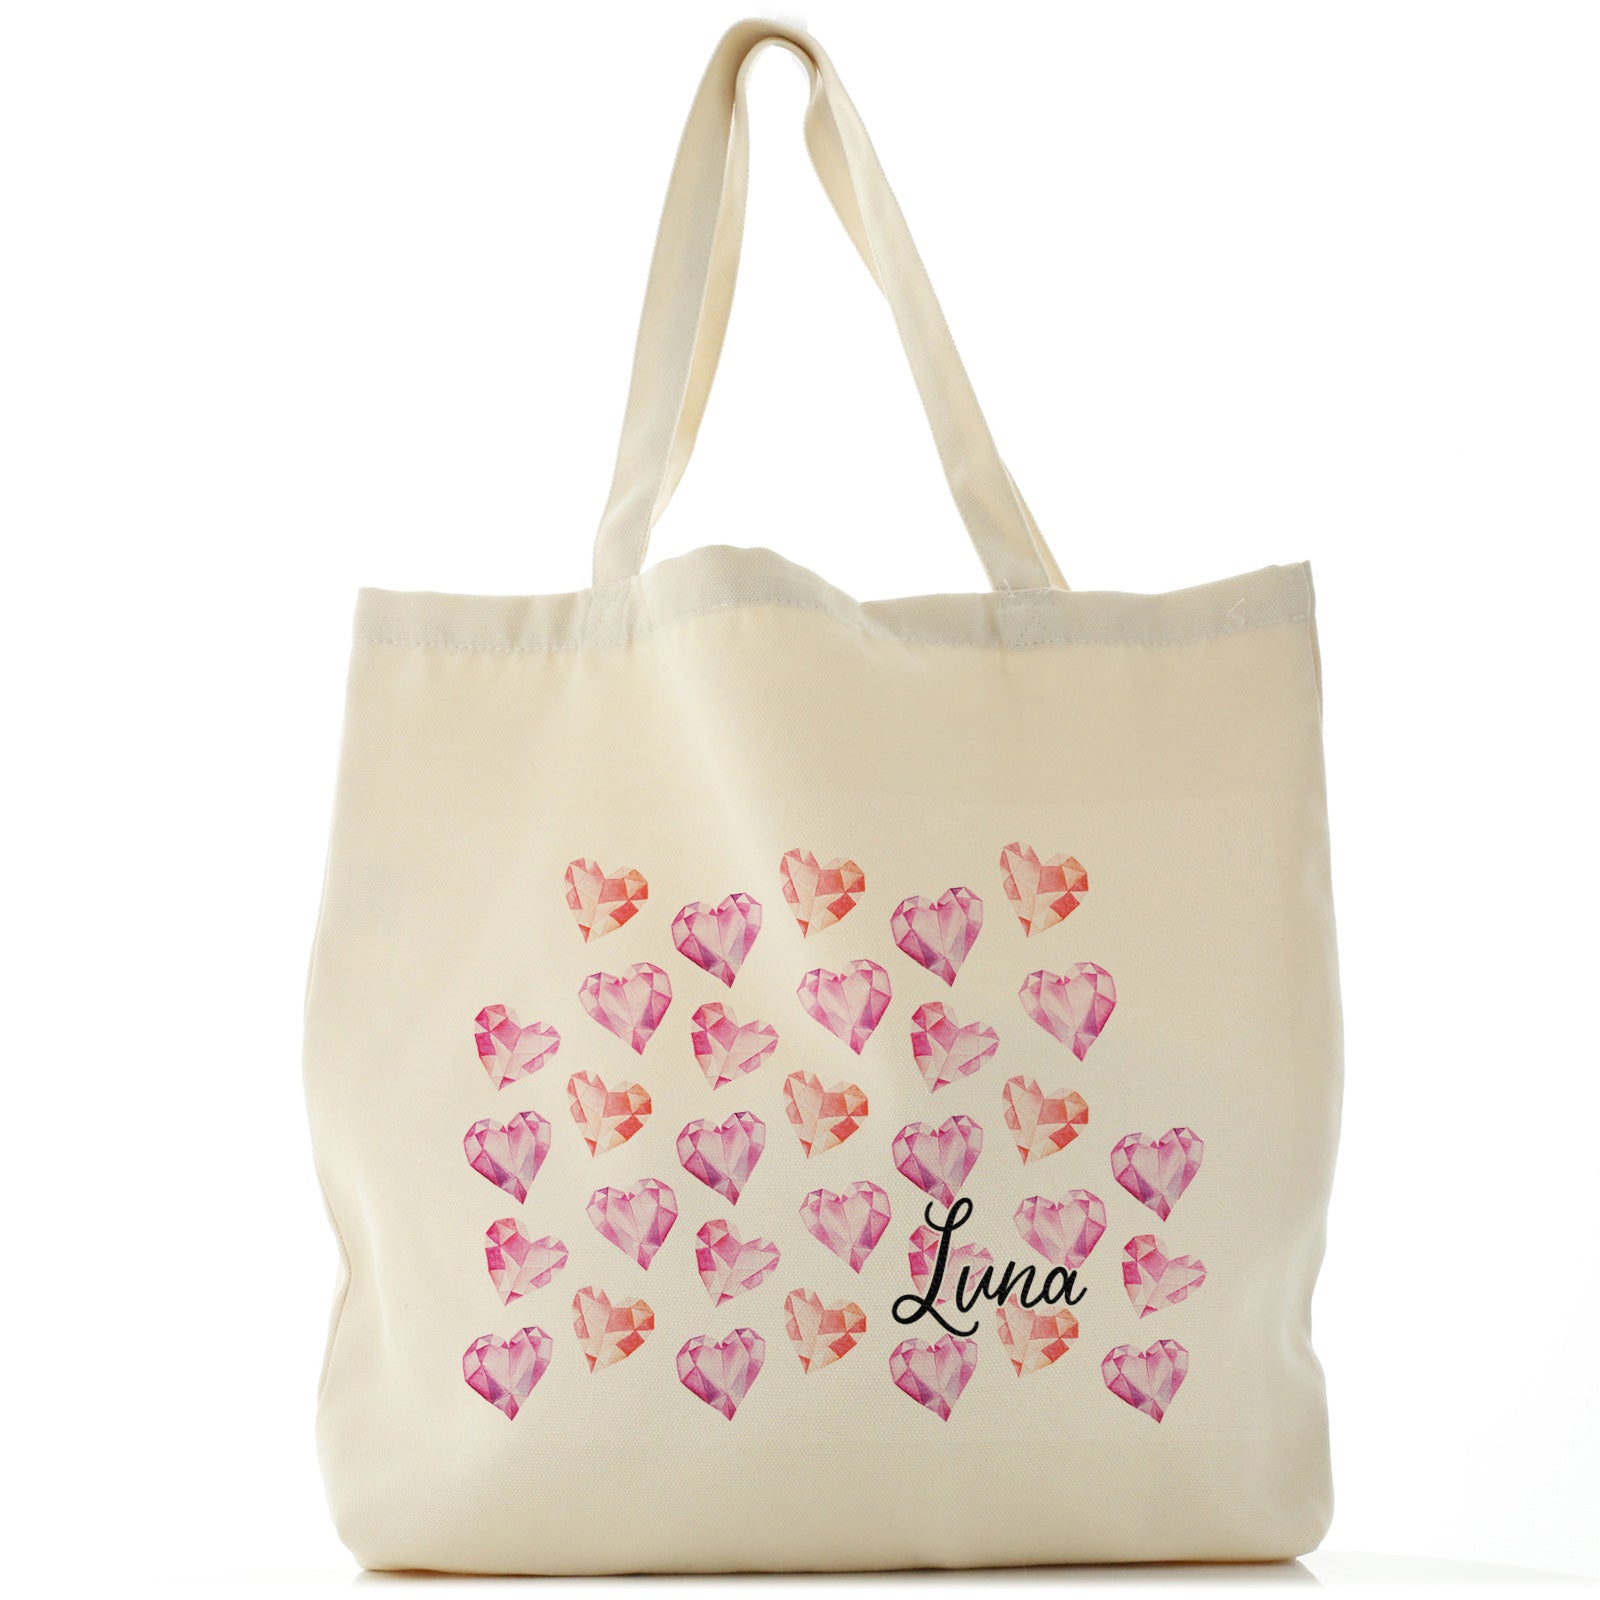 Personalised Tote Bag with Stylish Text and Crystal Hearts Print